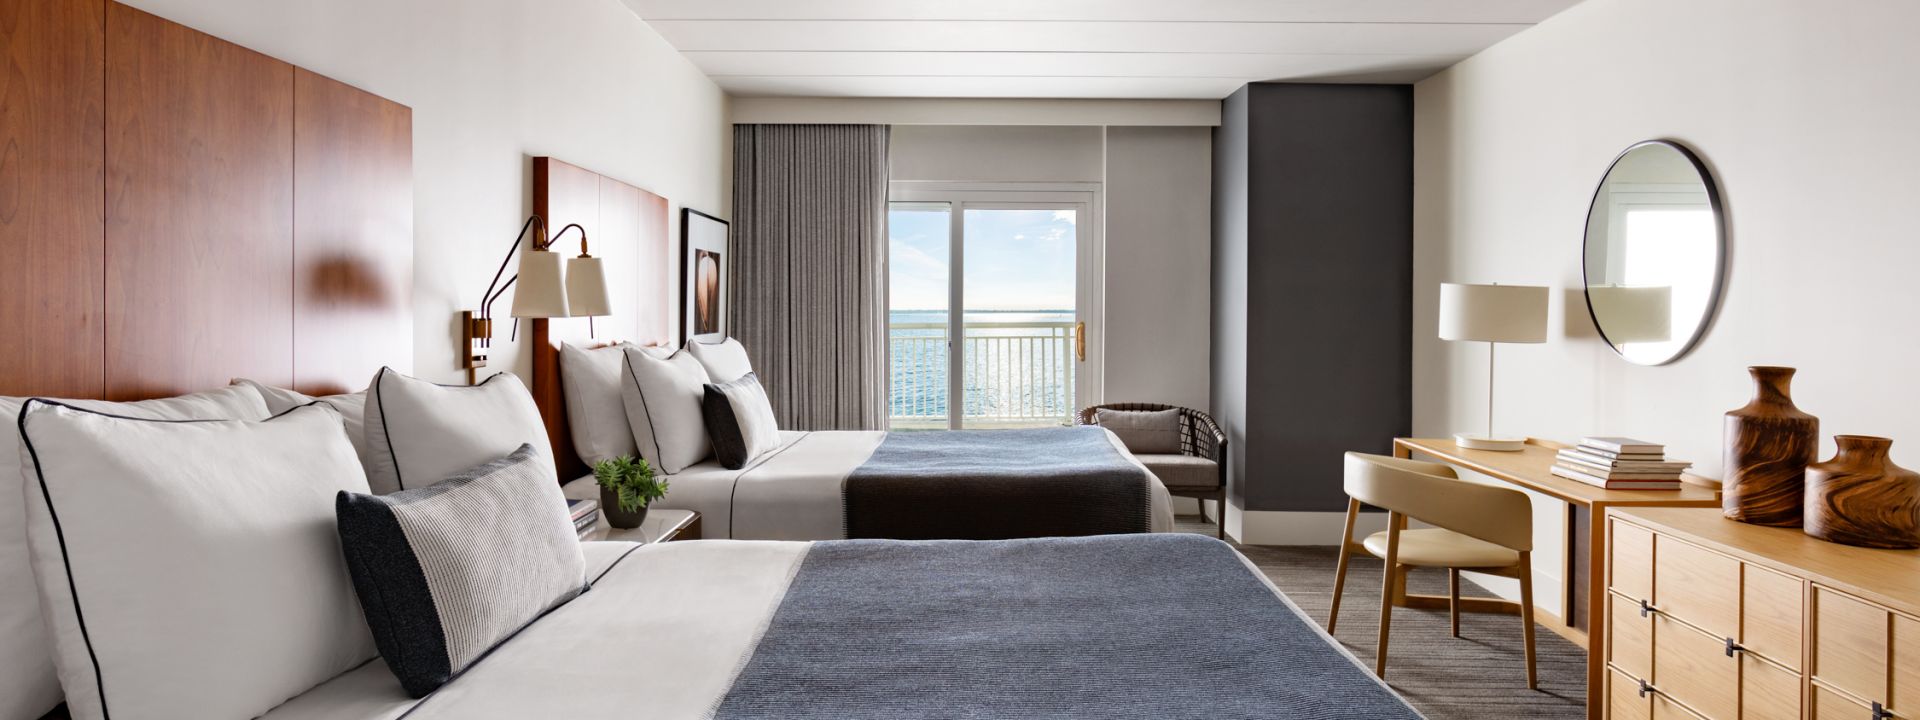 A modern hotel suite with two queen beds and an ocean view.